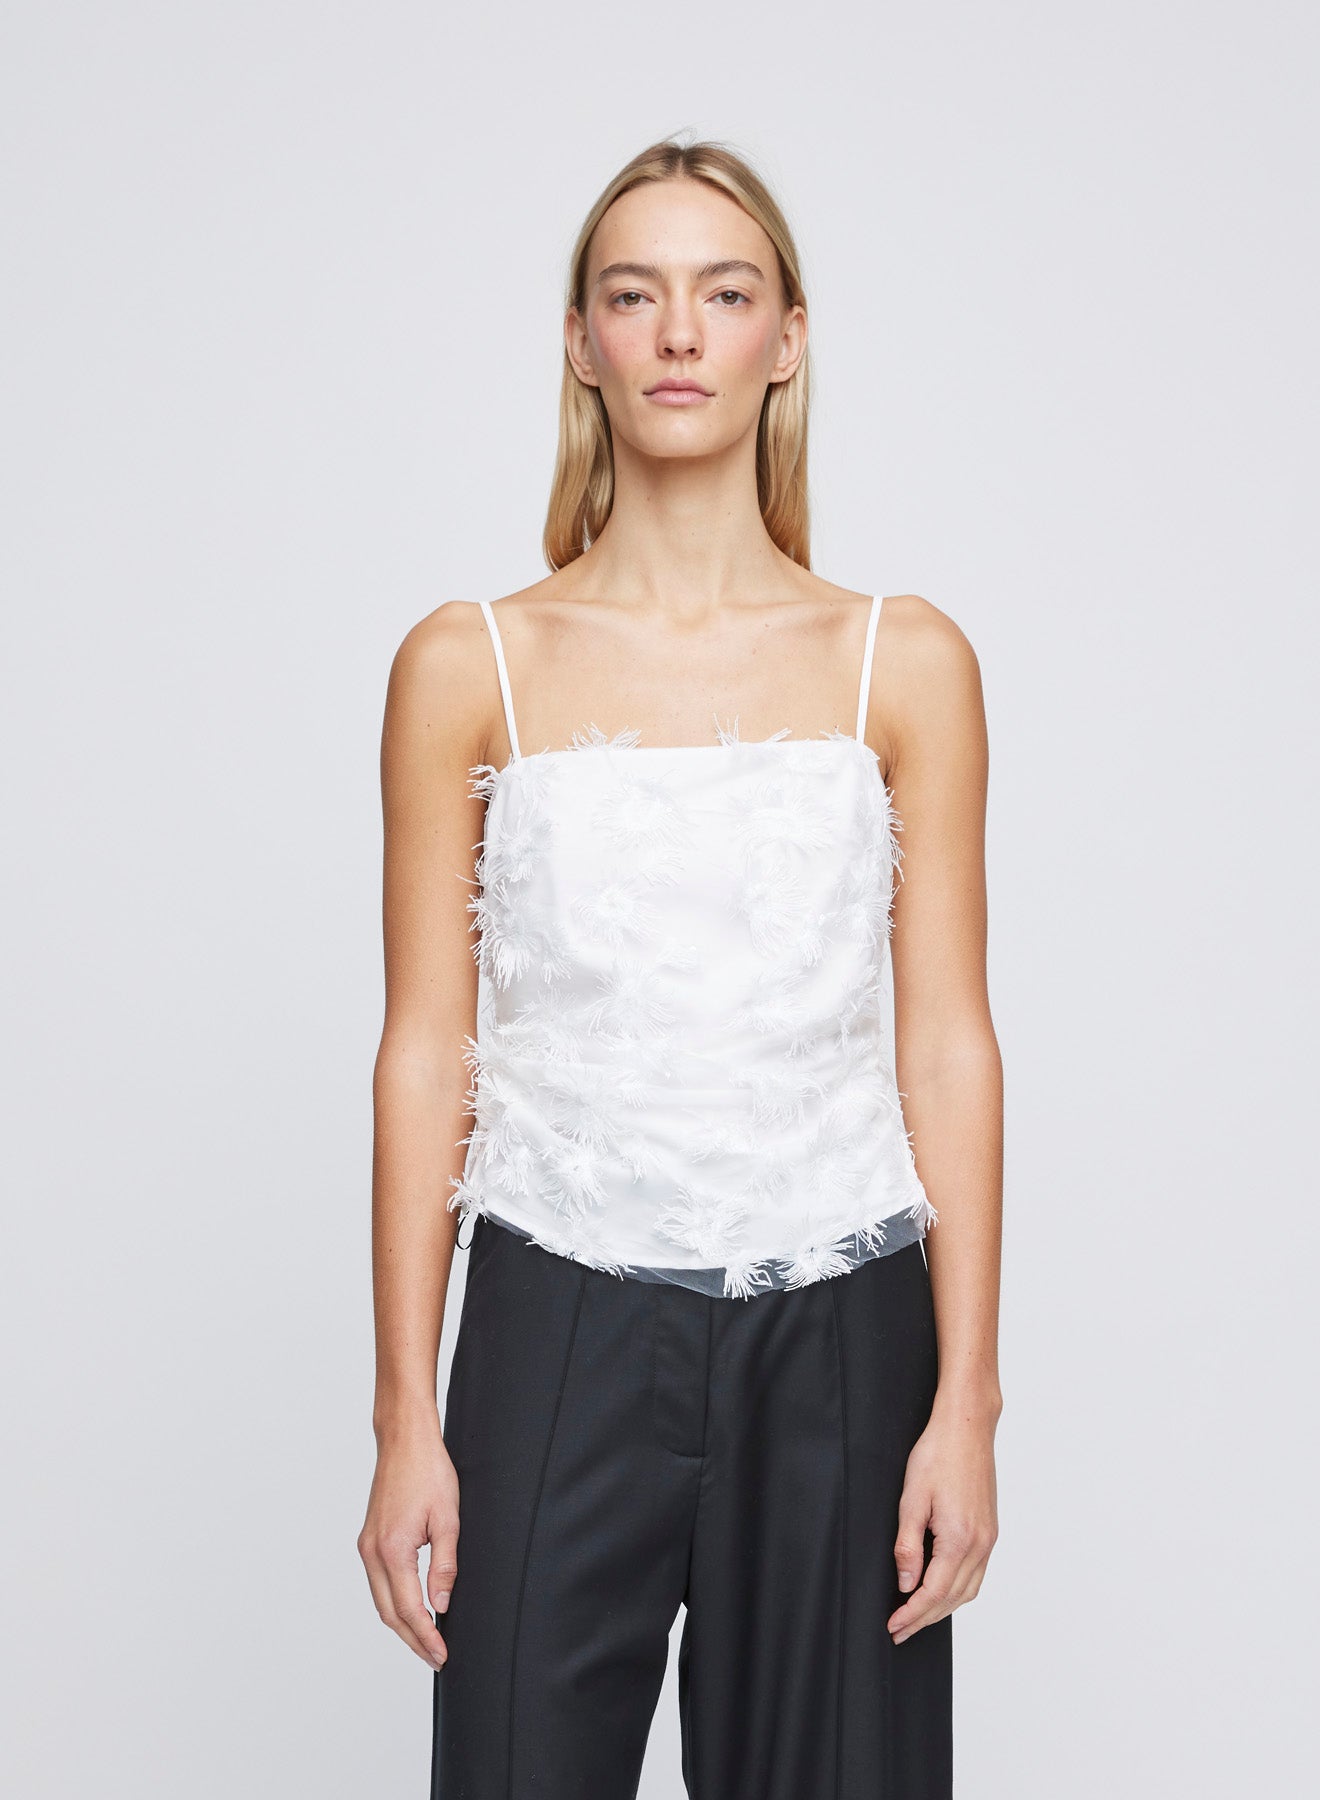 The ANNA QUAN Nadine Top is crafted in a Dandelion fabric. This fully lined, cropped in length top is lightweight and easy to wear. Detailed with a raw hem finish and a delicate square neckline.